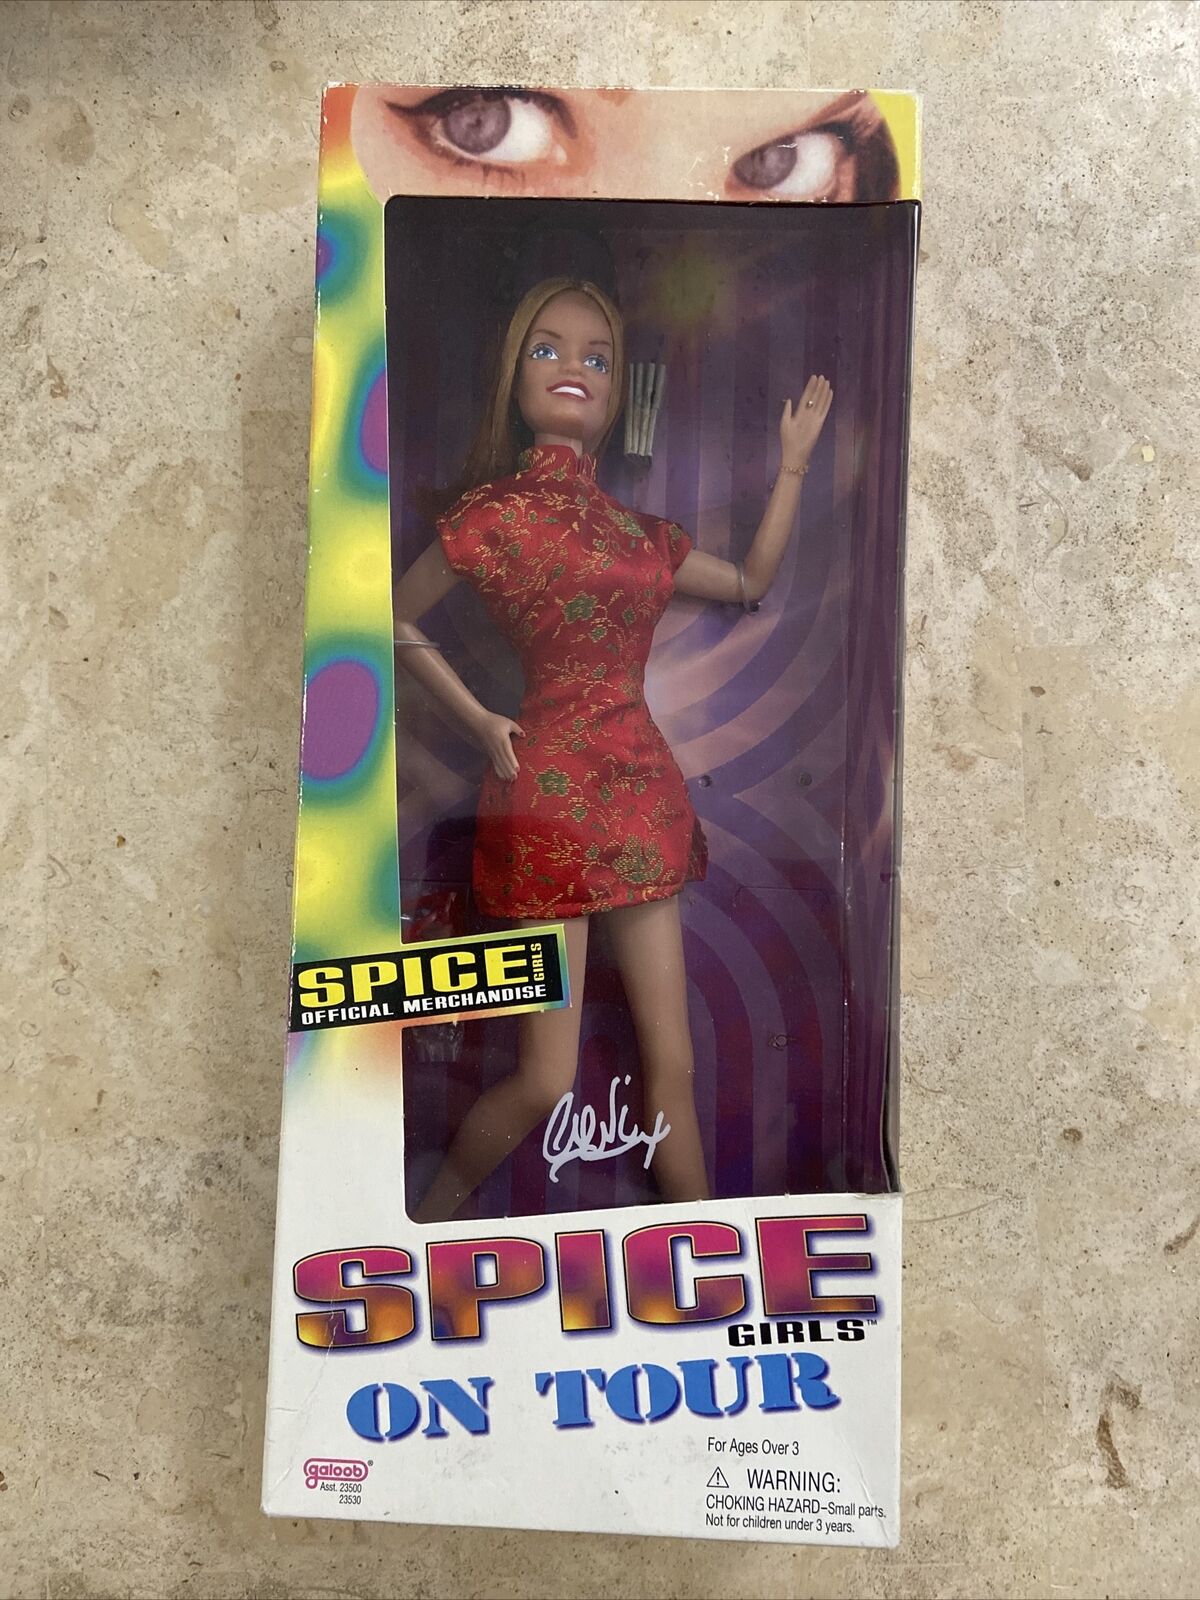 Spice Girls On Tour Ginger Spice Geri Halliwell Doll Galoob 1998 New 